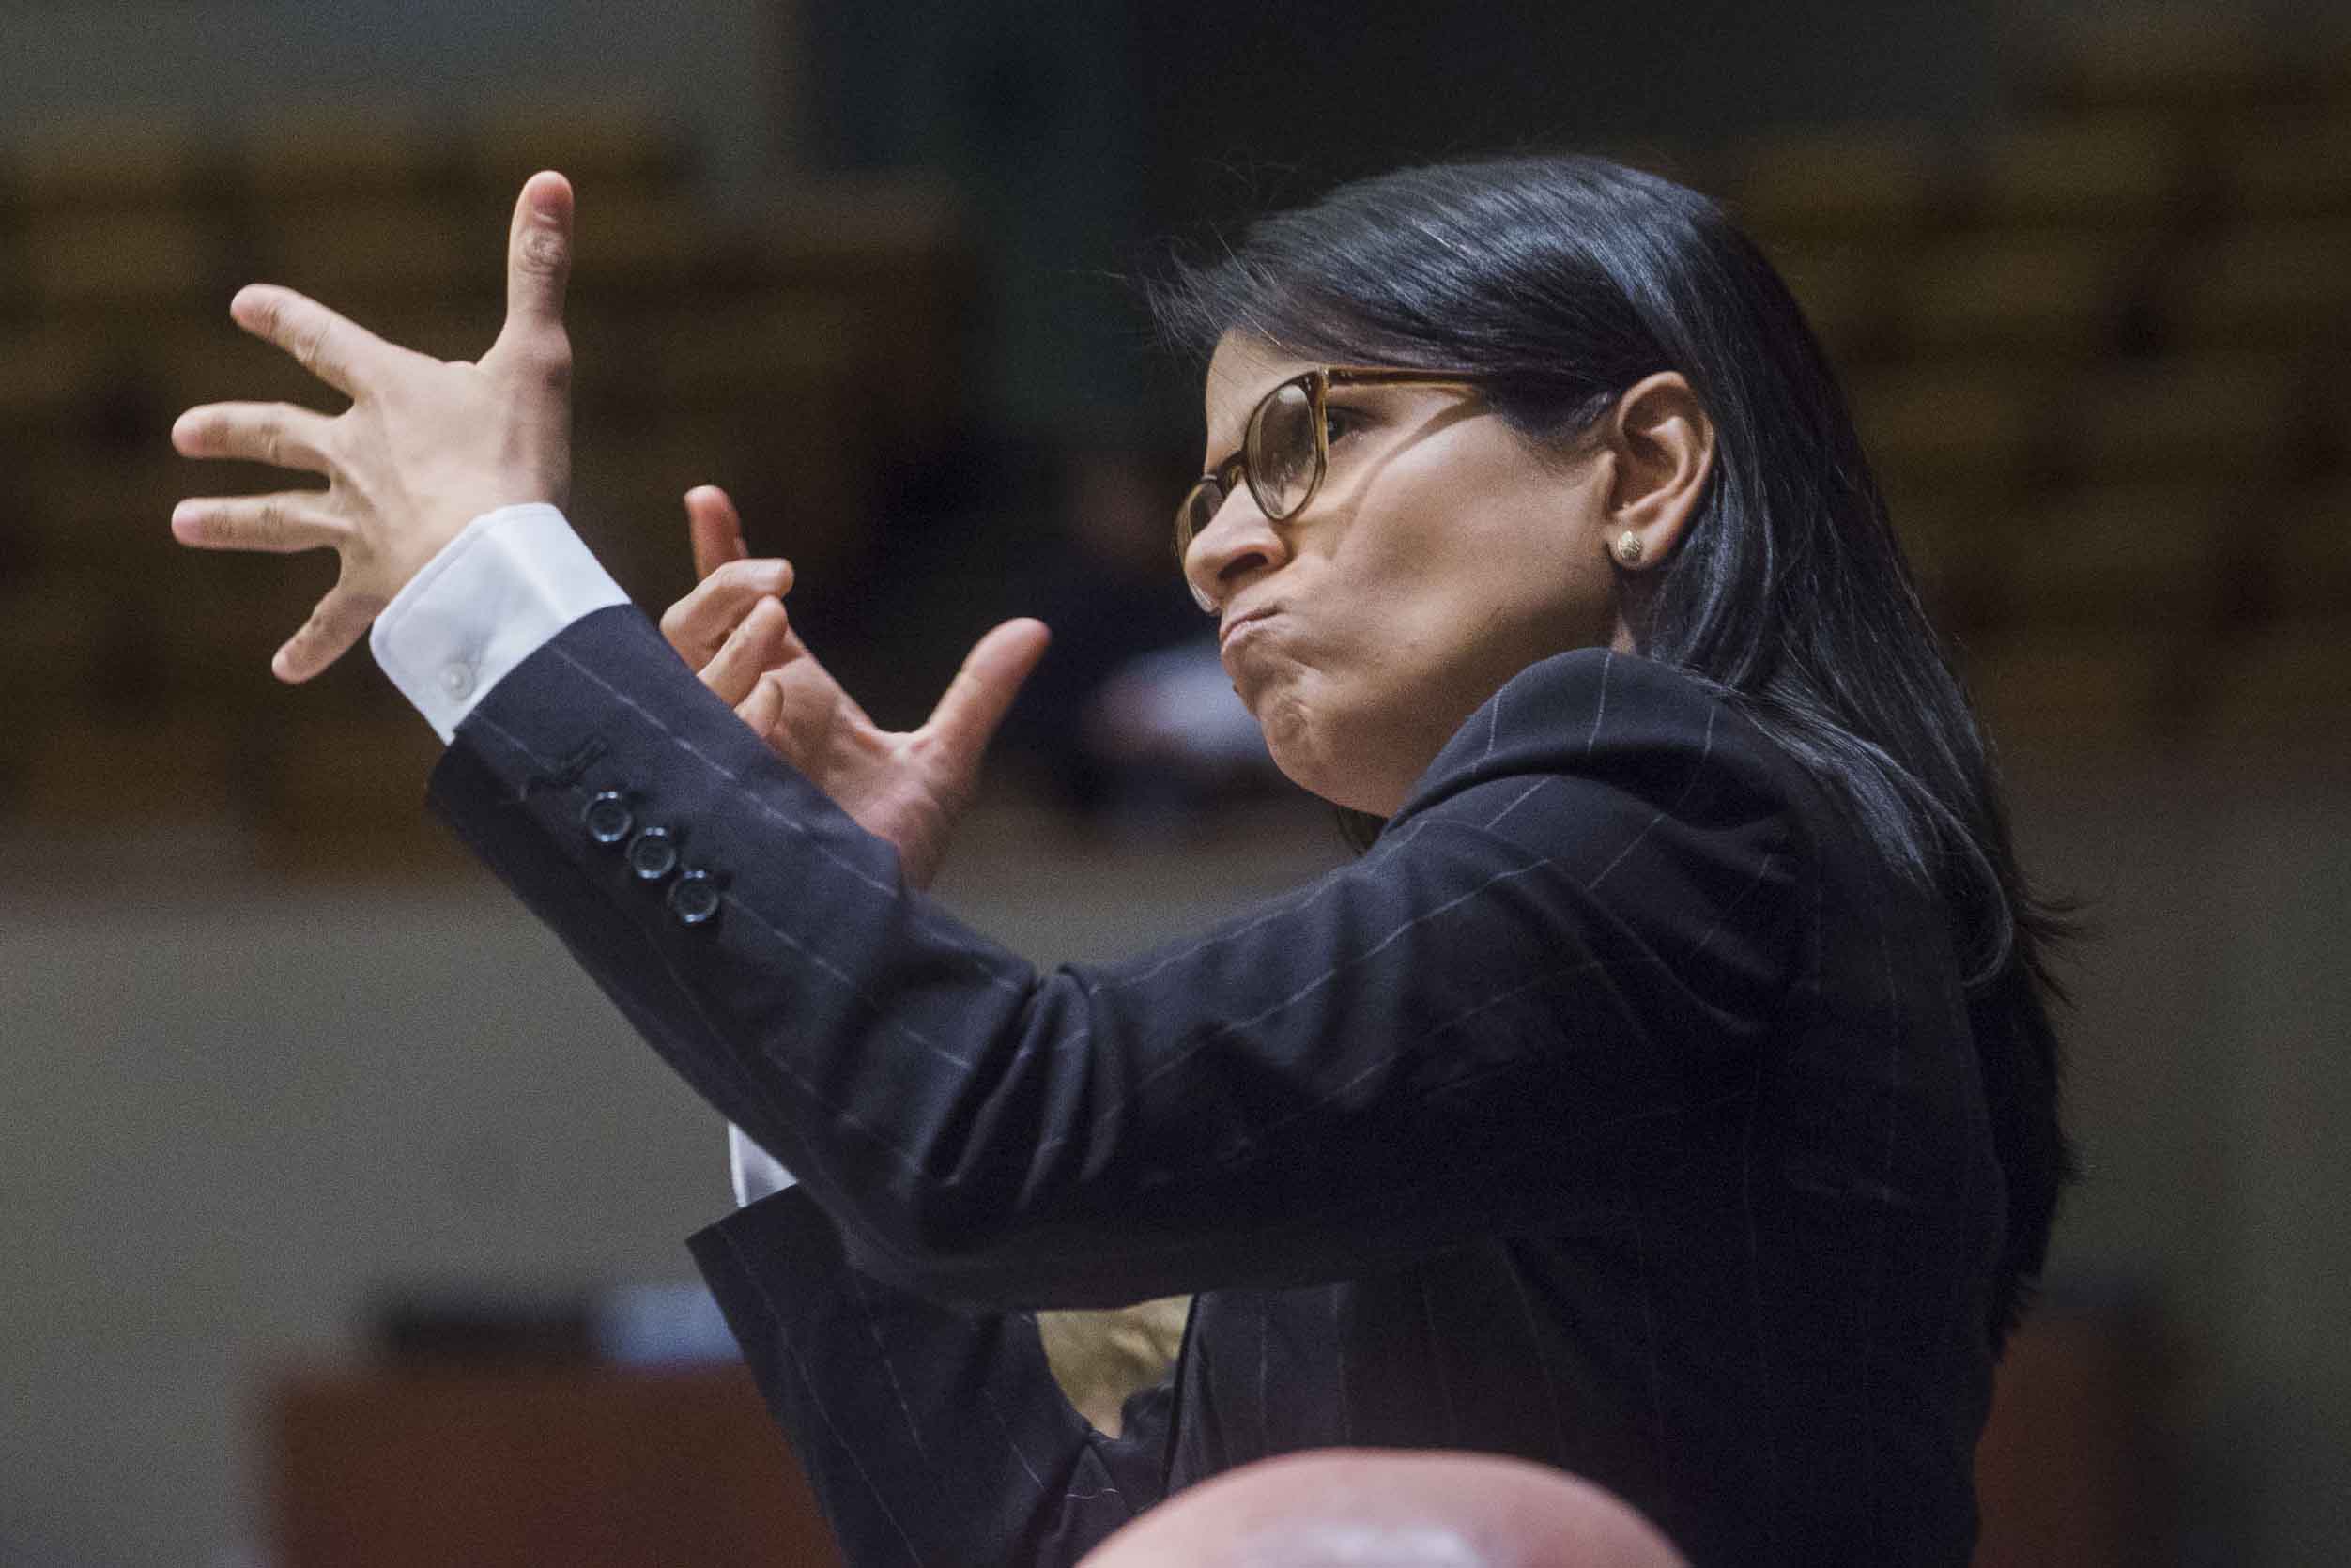 Maleni Chaitoo, representative of the International Disability Alliance C International Disability and Development Consortium (IDA/IDDC), addresses the meeting using sign language during a special event in observance of the International Day of Persons with Disabilities (51Թ, New York, 3 December 2015).